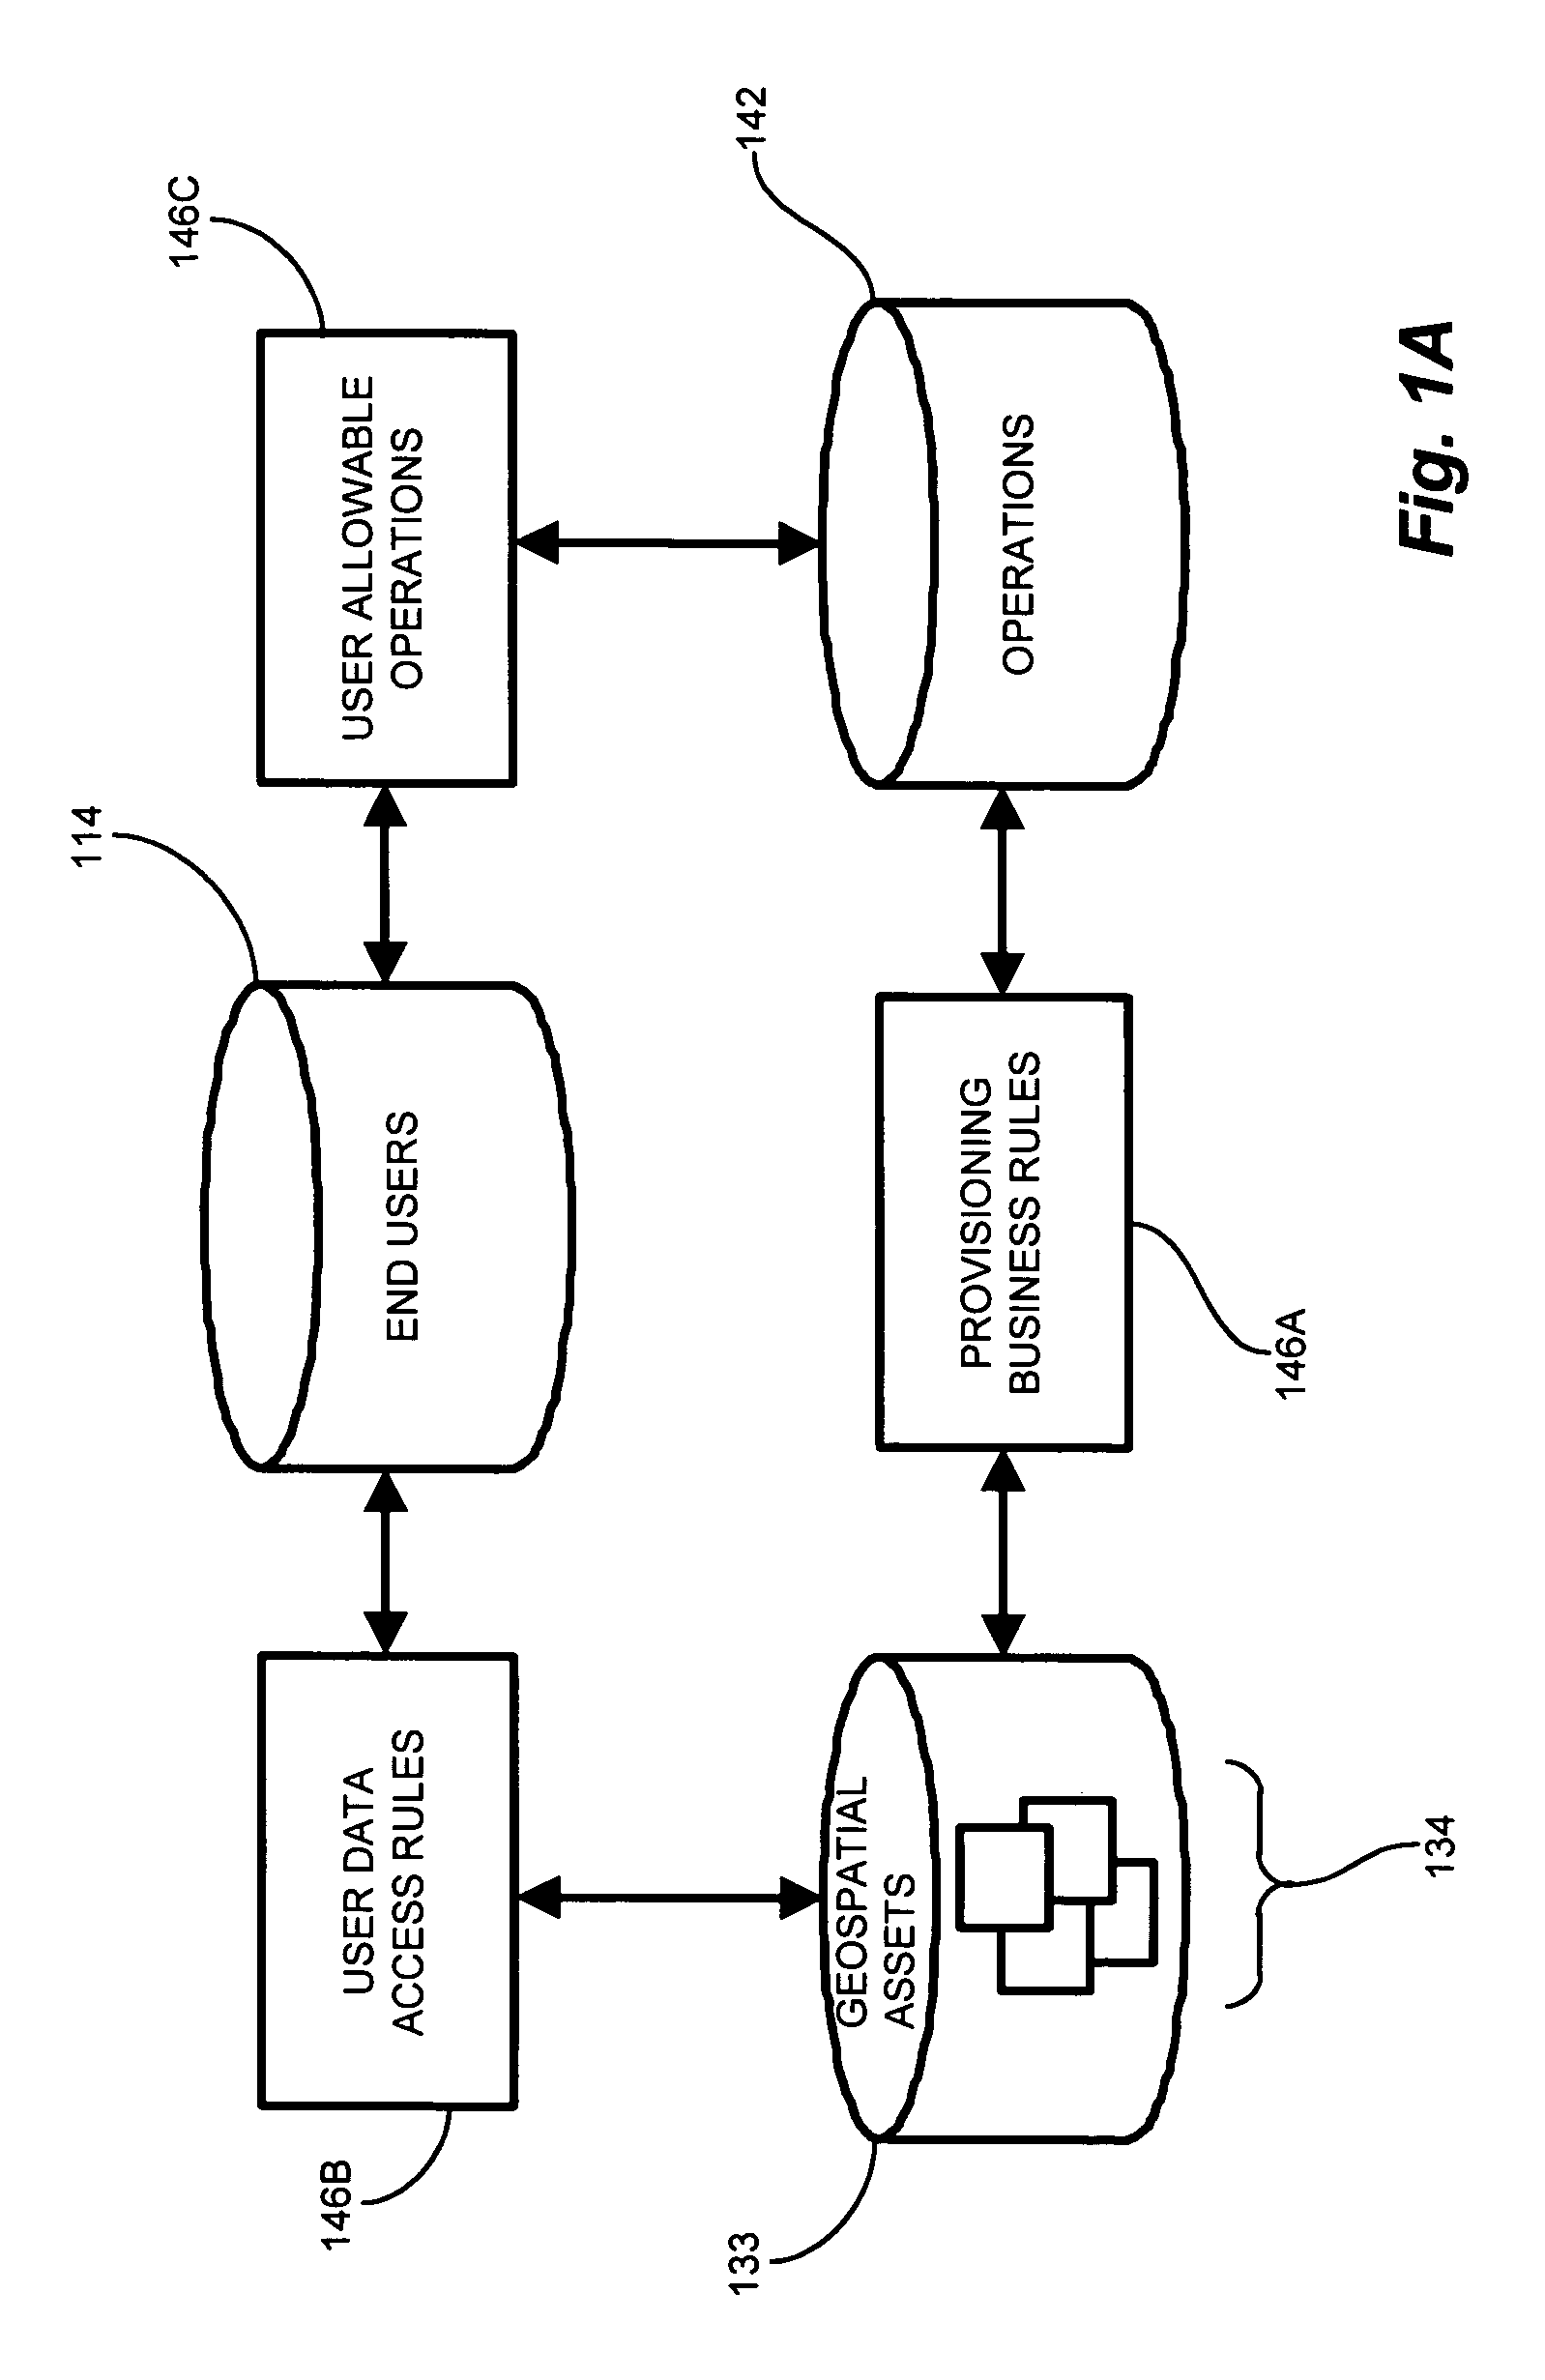 System and methods for provisioning geospatial data